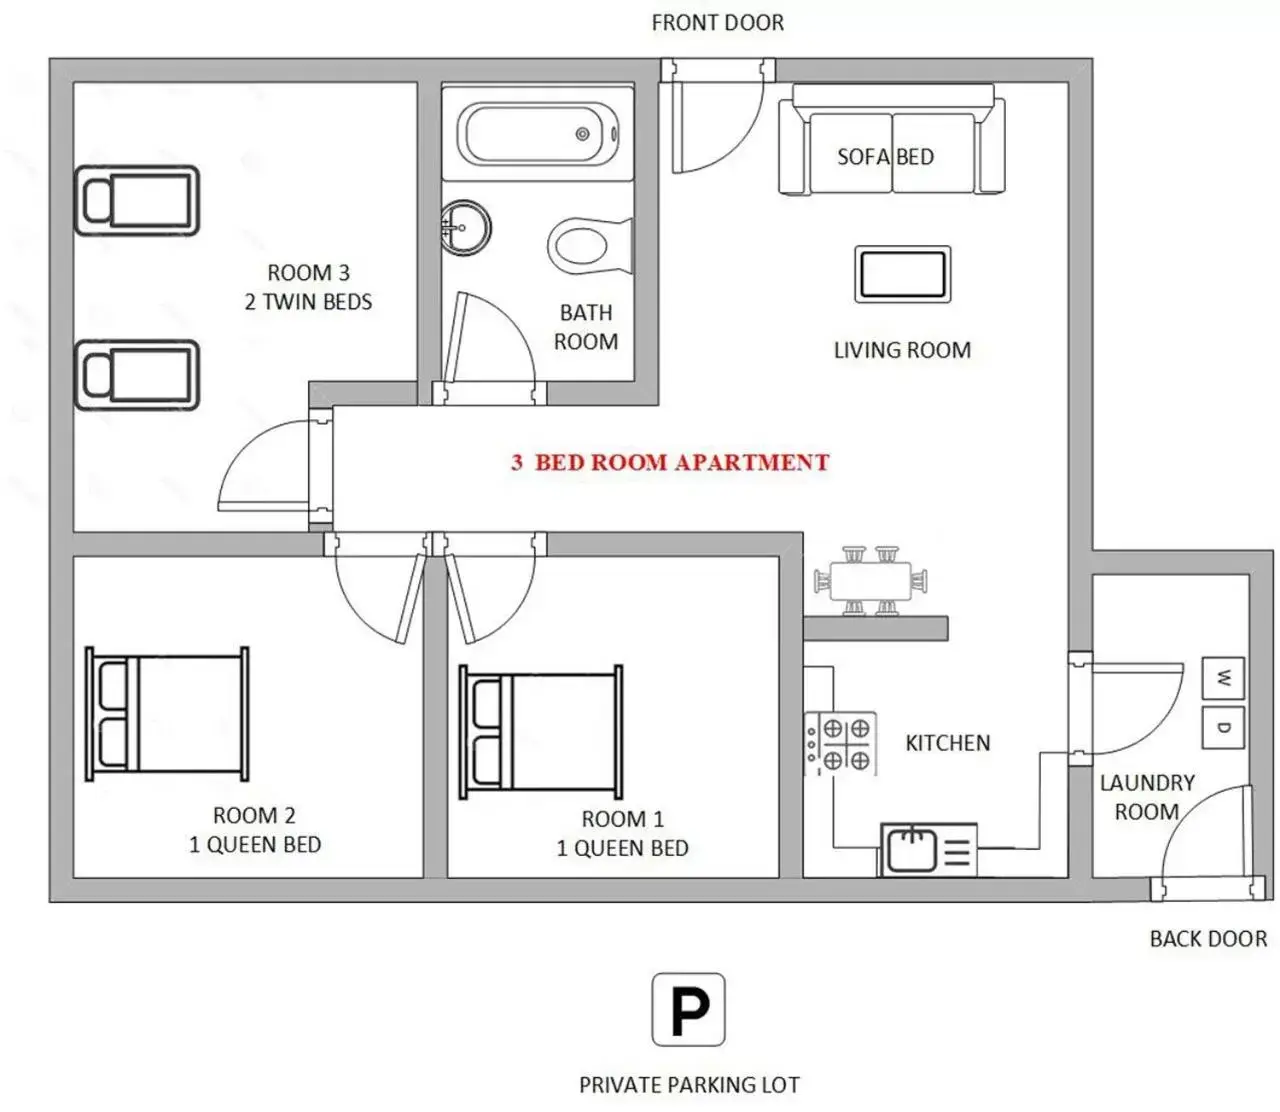 Floor Plan in 1 or 3 Bedroom Apartment with Full Kitchen